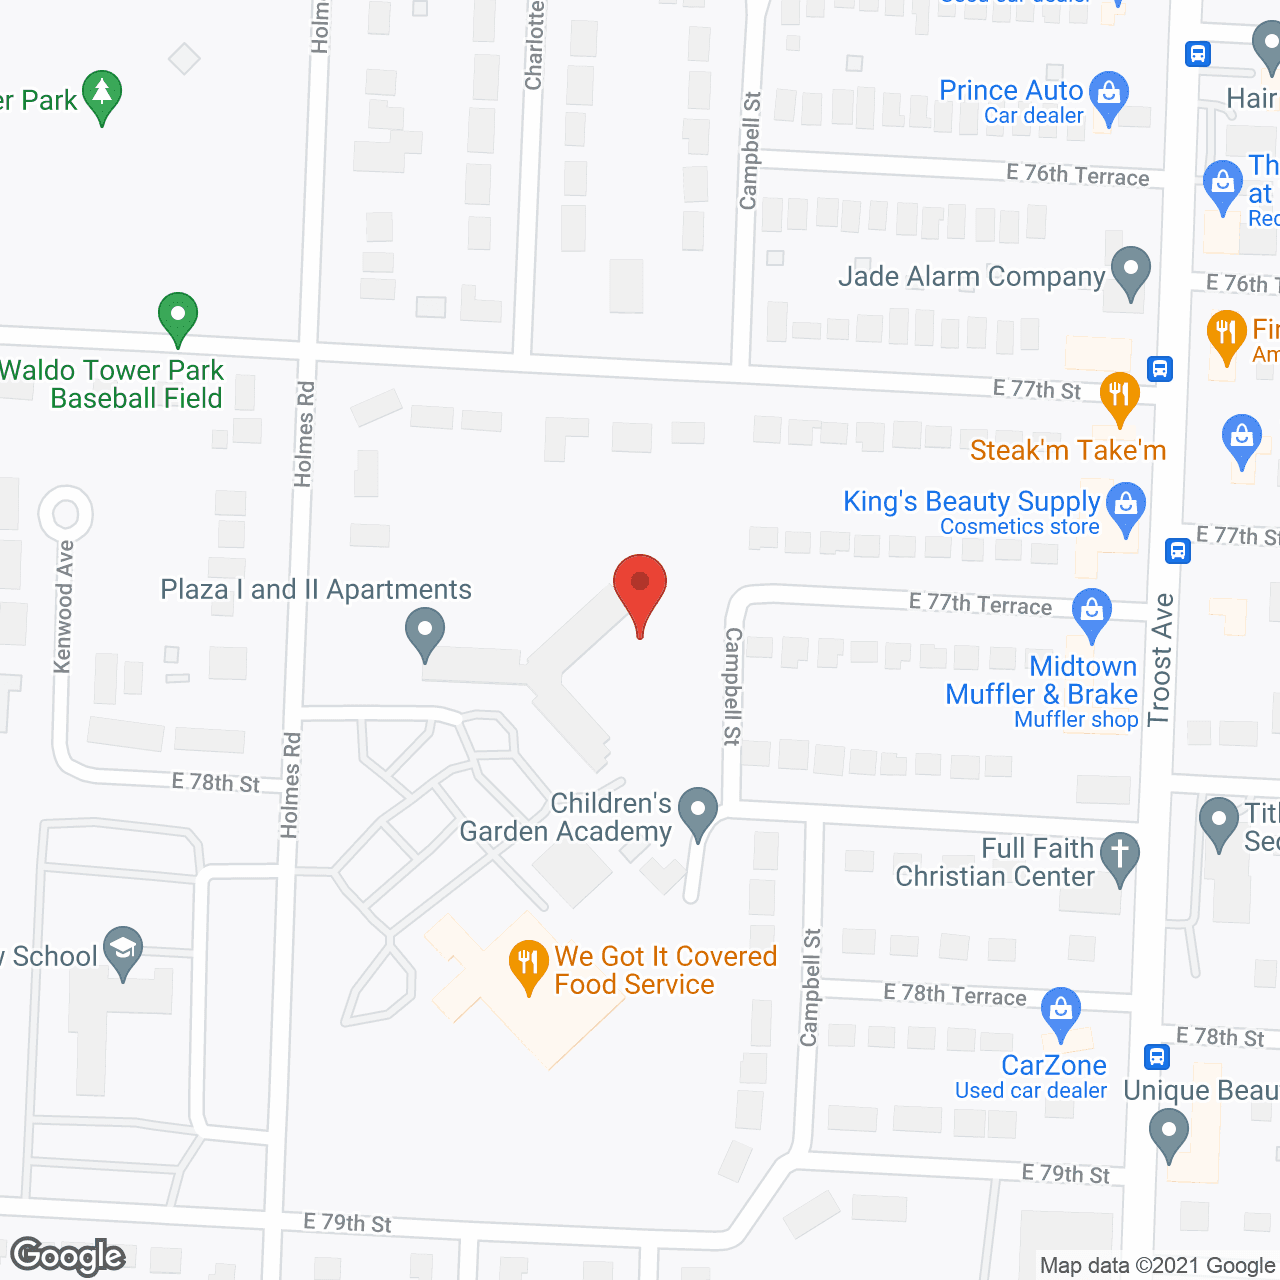 Plaza l and ll Apts in google map